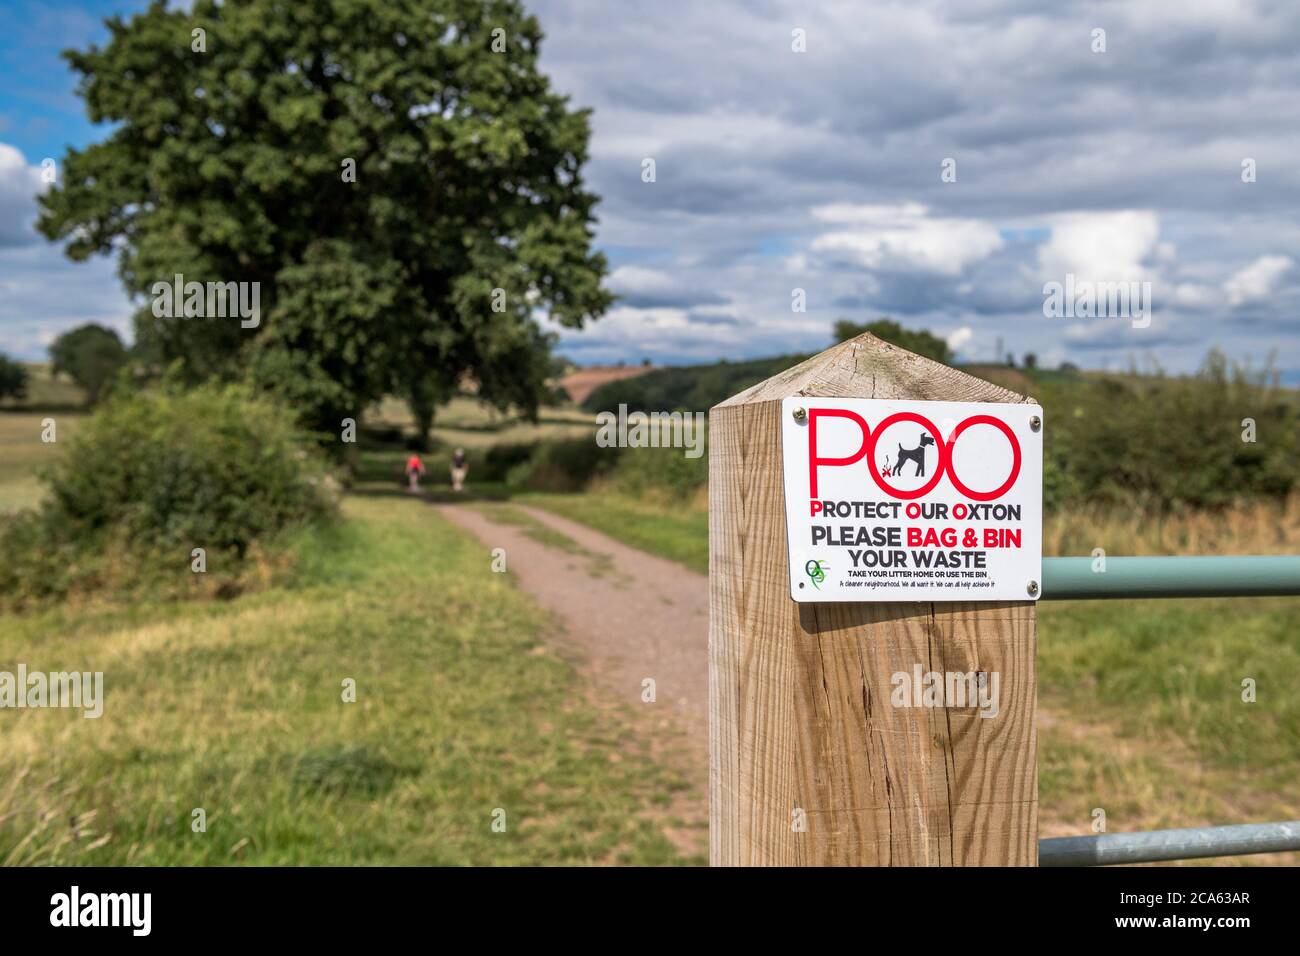 Please bag and bin sign on a English country lane, Stock Photo